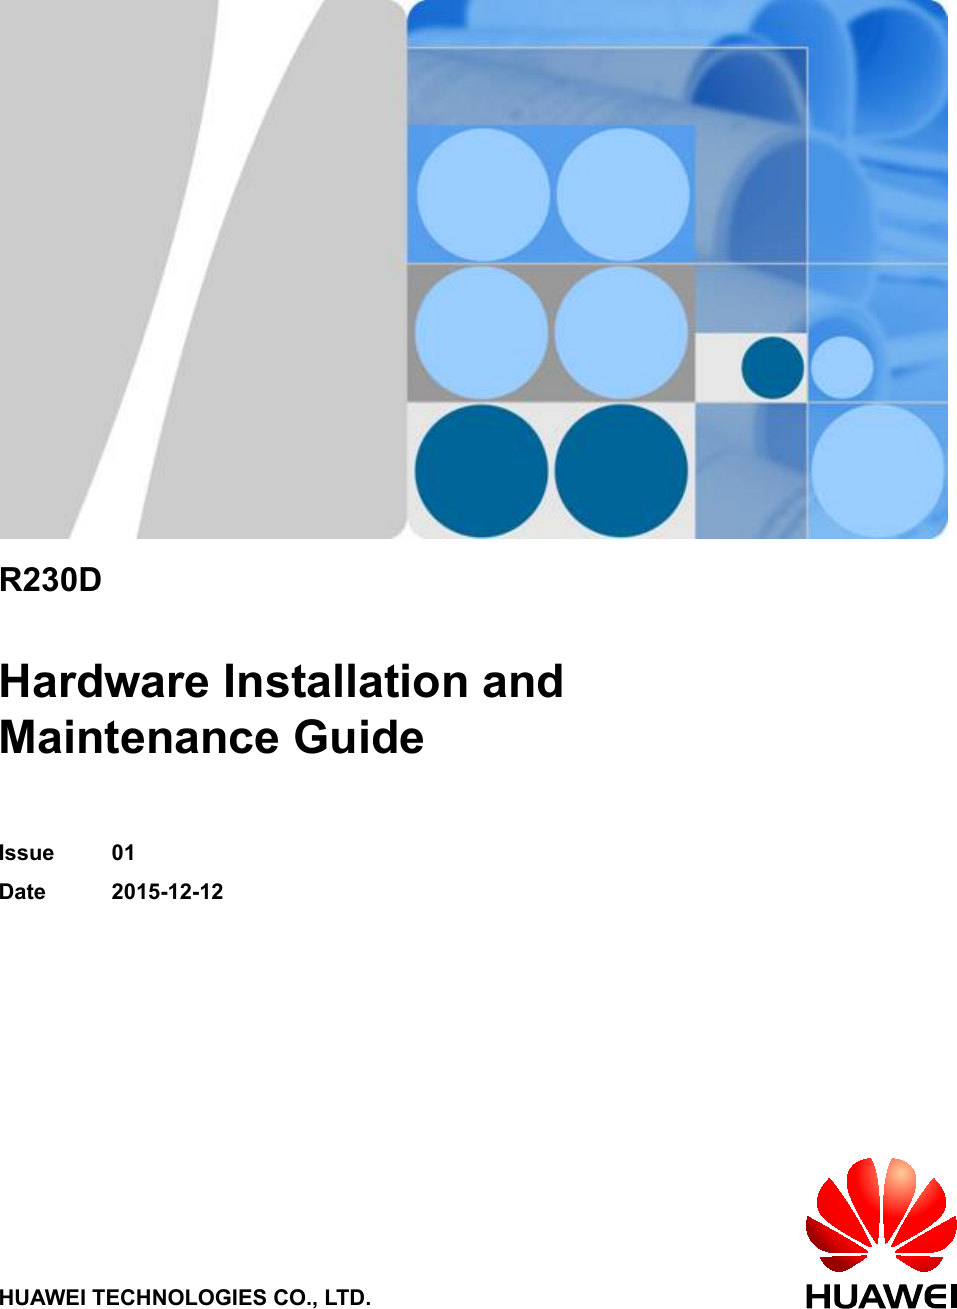 R230DHardware Installation andMaintenance GuideIssue 01Date 2015-12-12HUAWEI TECHNOLOGIES CO., LTD.